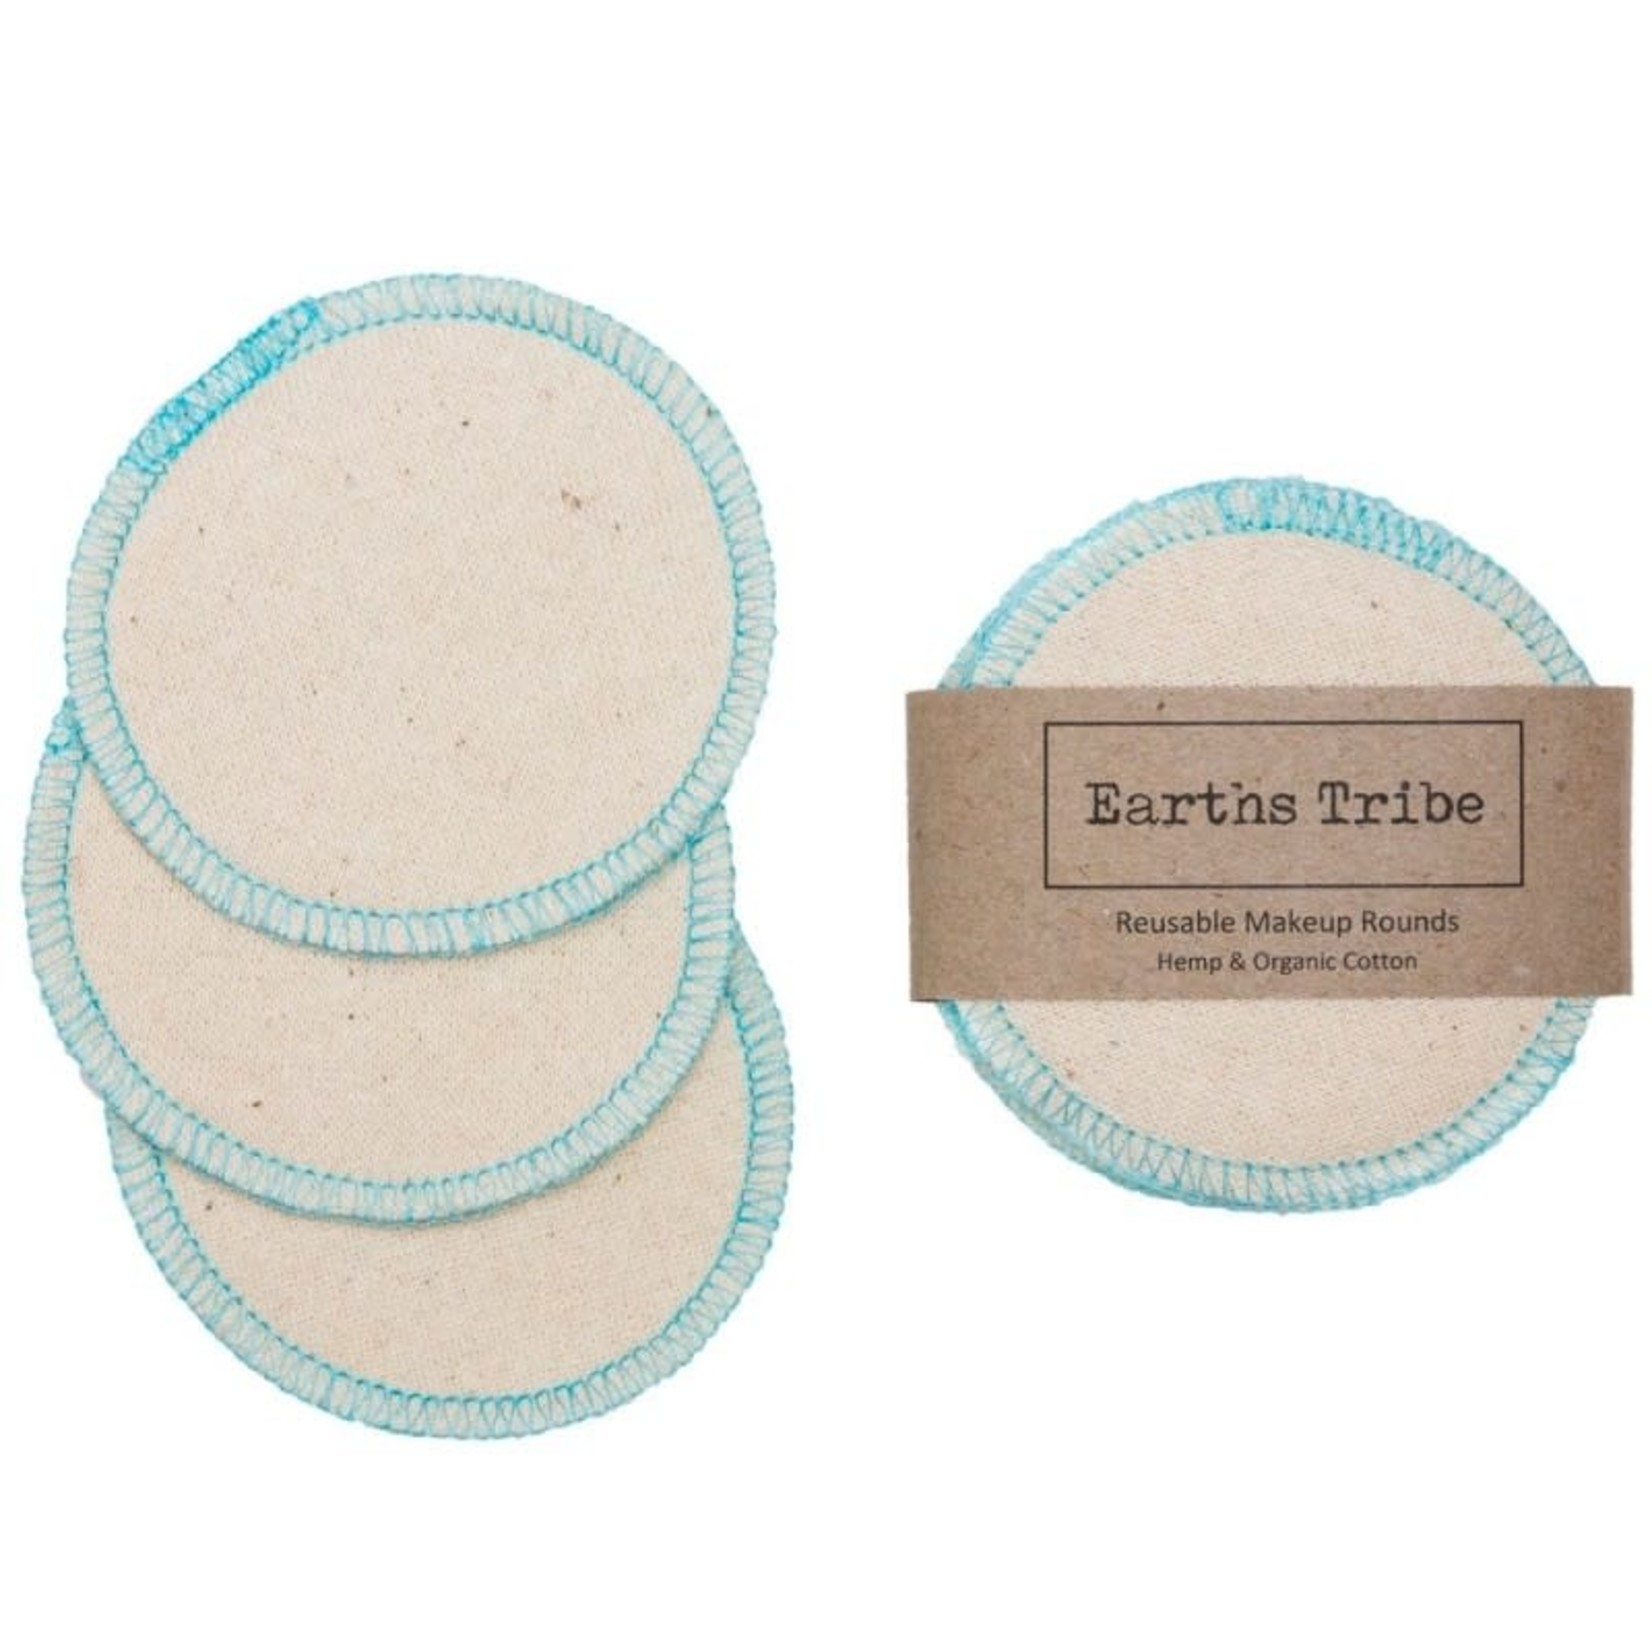 Earths Tribe Earths Tribe Reusable Makeup Rounds